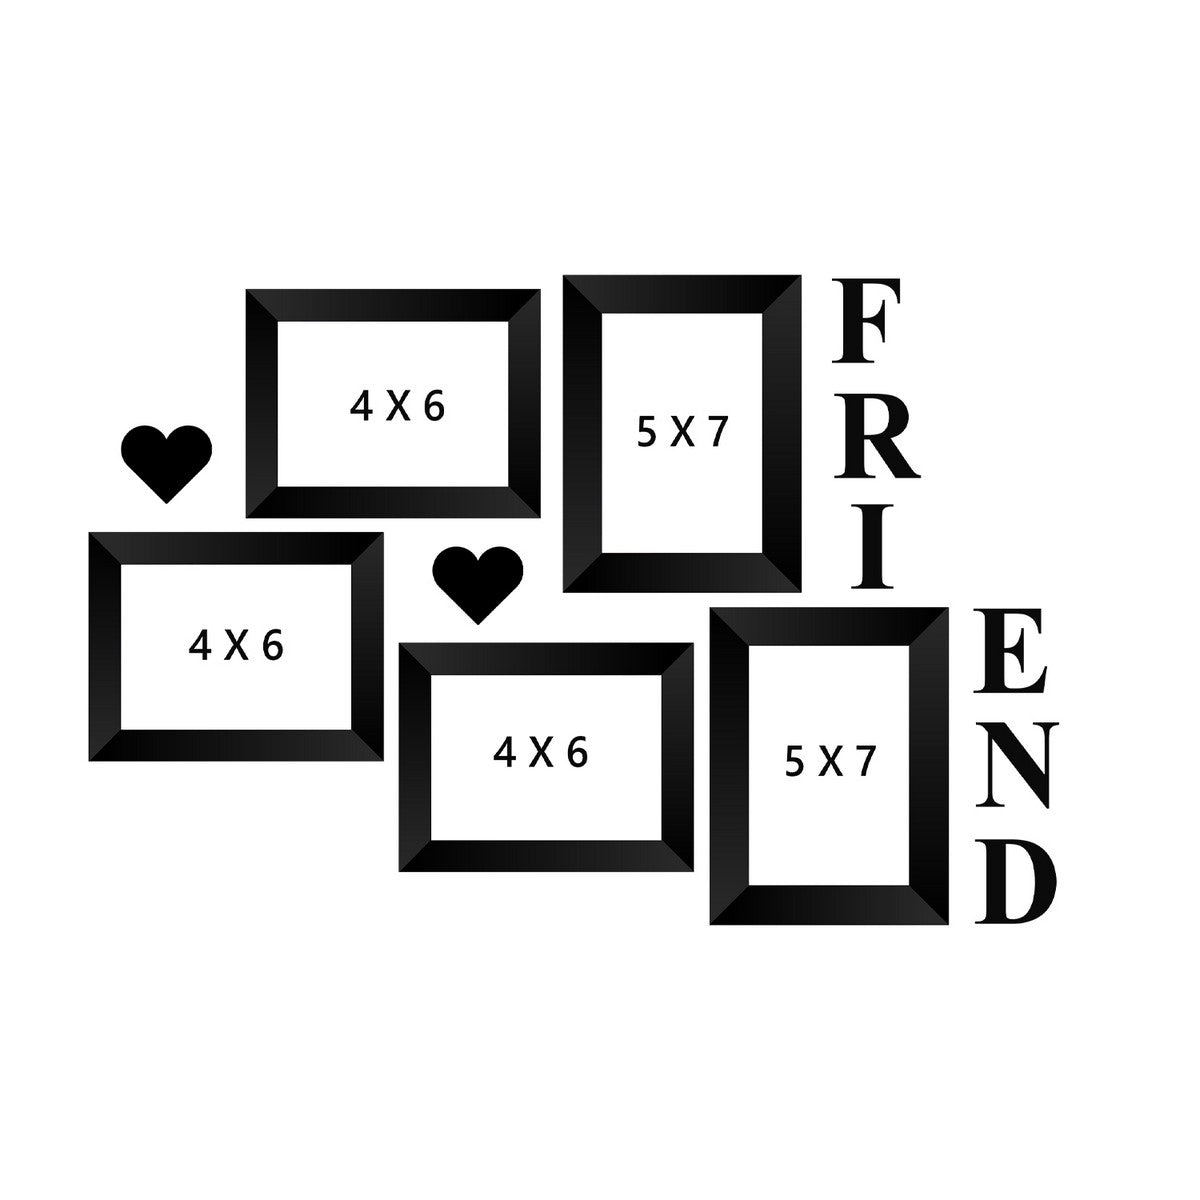 Memory Wall Collage Photo Frame - Set of 5 Photo Frames for 3 Photos of 4"x6", 2 Photos of 5"x7", 1 Piece of FRIENDS, 2 Pieces of HEARTS 3